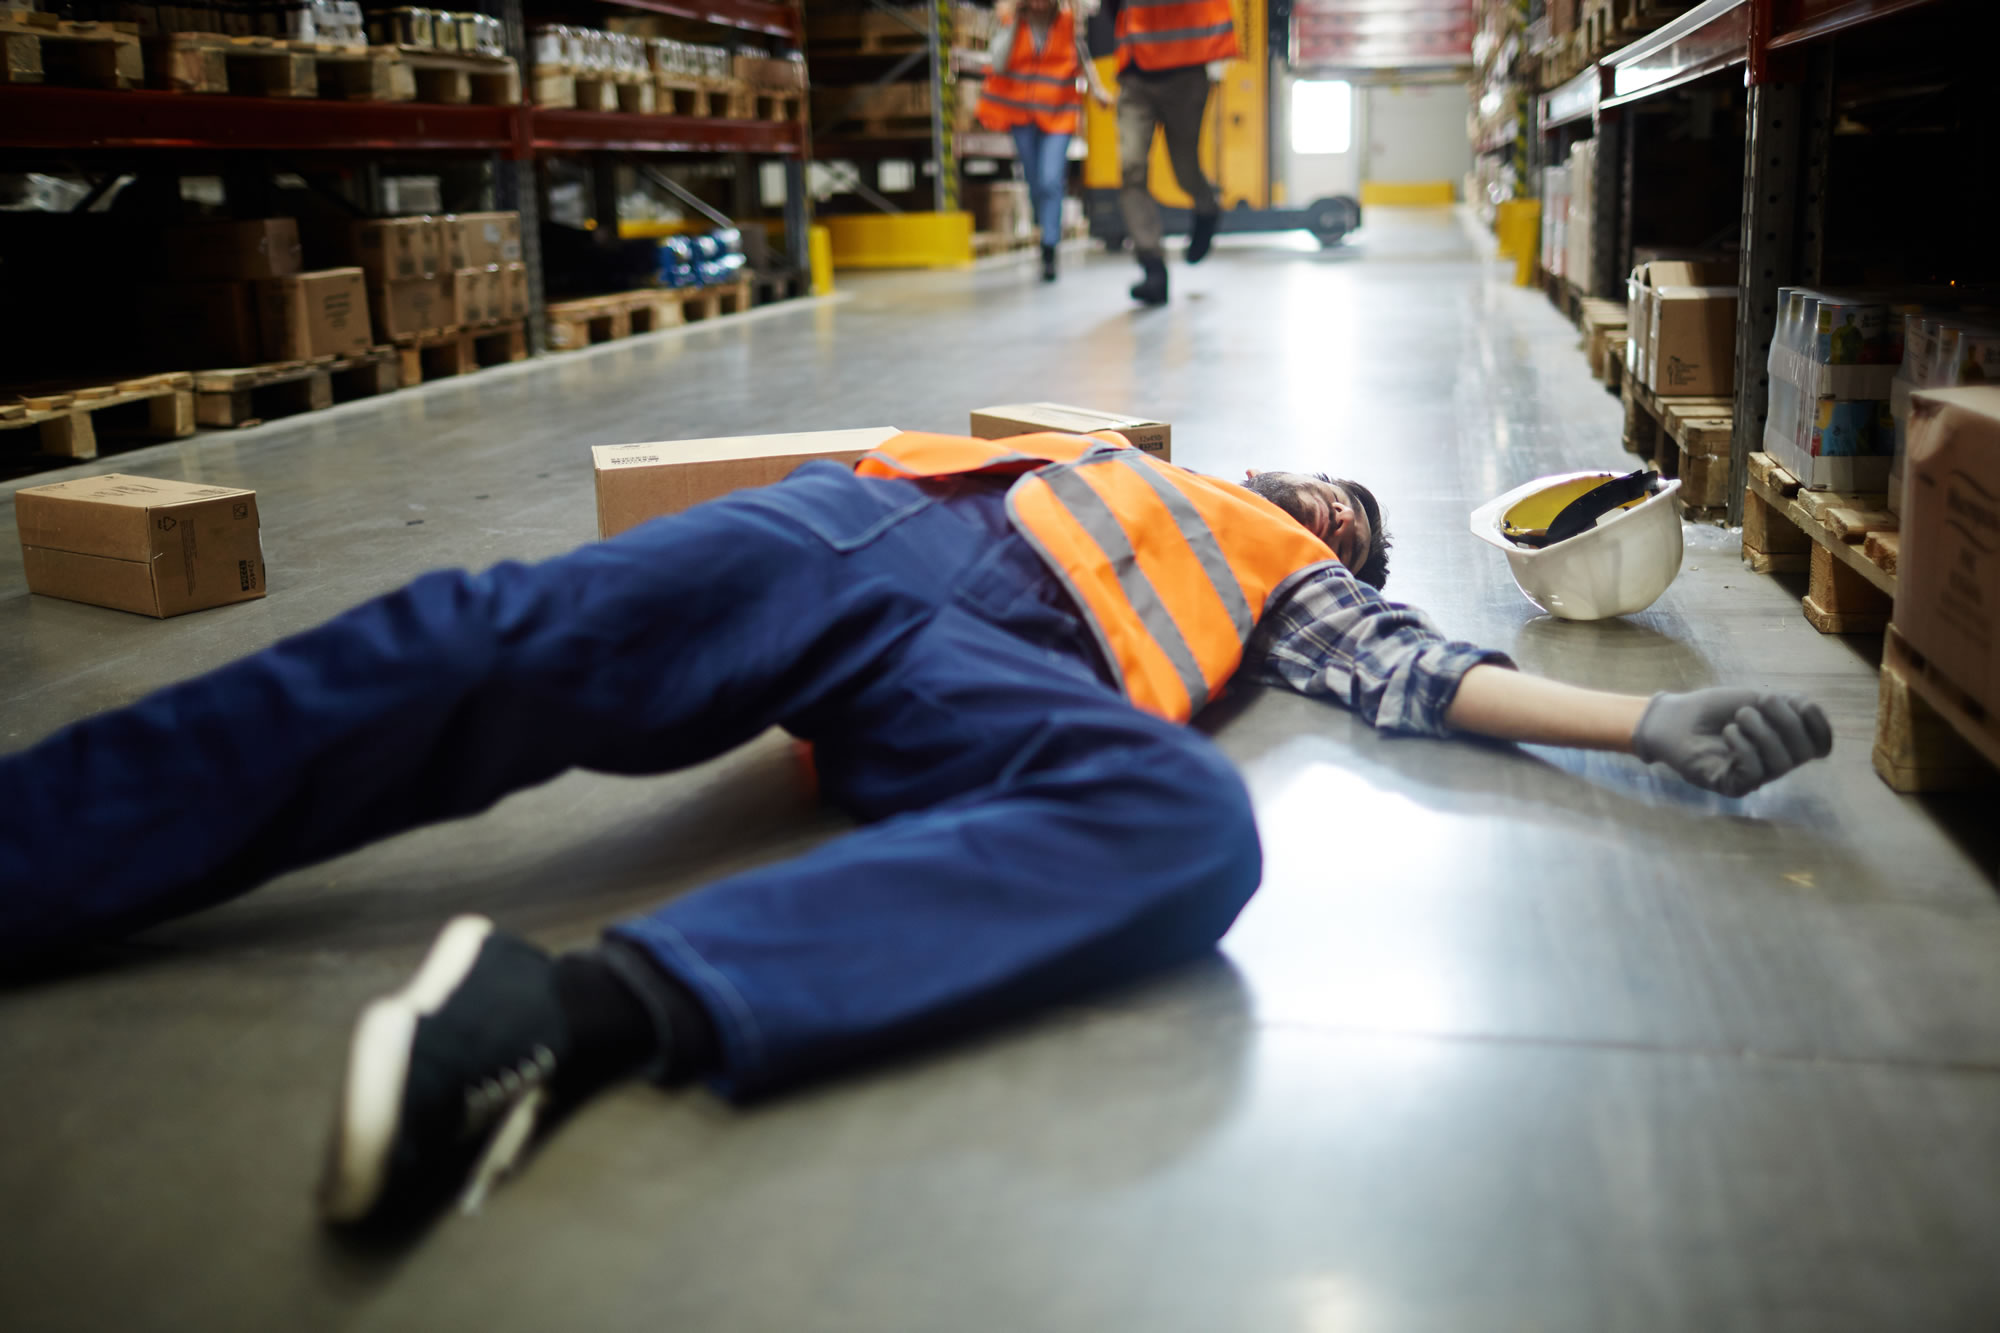 Workplace Slip, Trip or Fall - slip and trip hazards in the workplace, suing employer for negligence, accidents at work